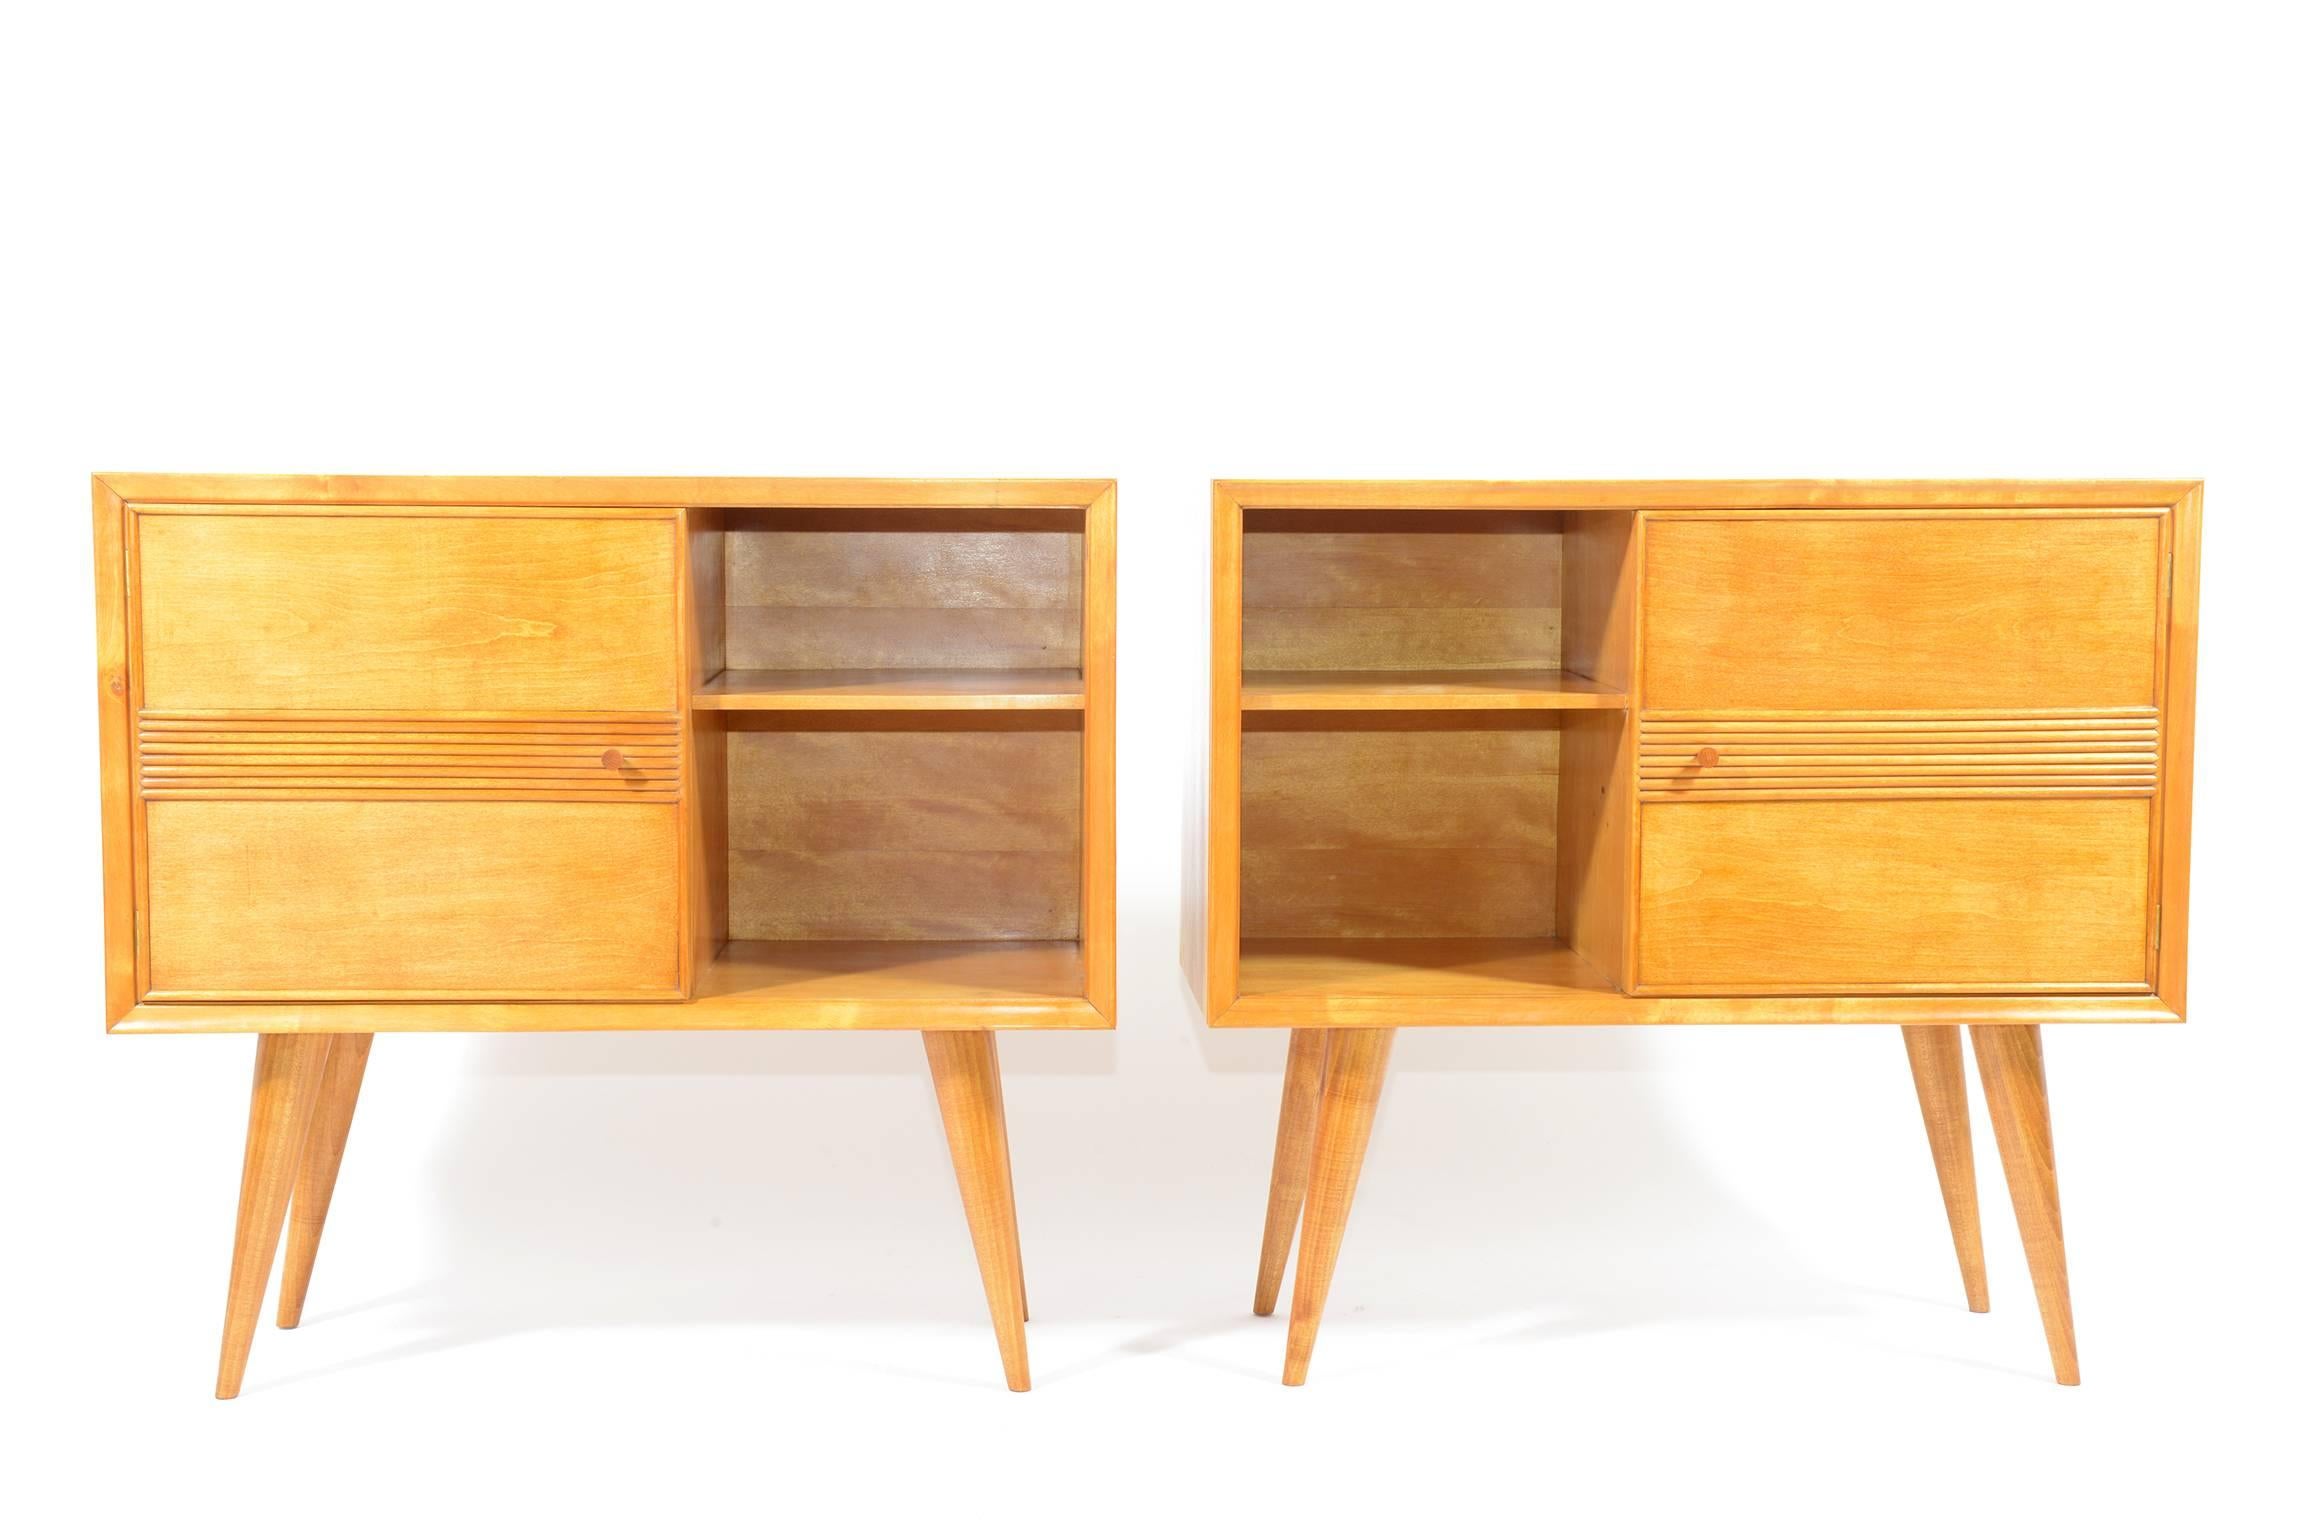 Pair of satin wood cabinet slender conic legs, doors with shelve inside.
This pair of cabinets belong to a holiday home projected by Pier Giulio Magistretti in the 1940.
 